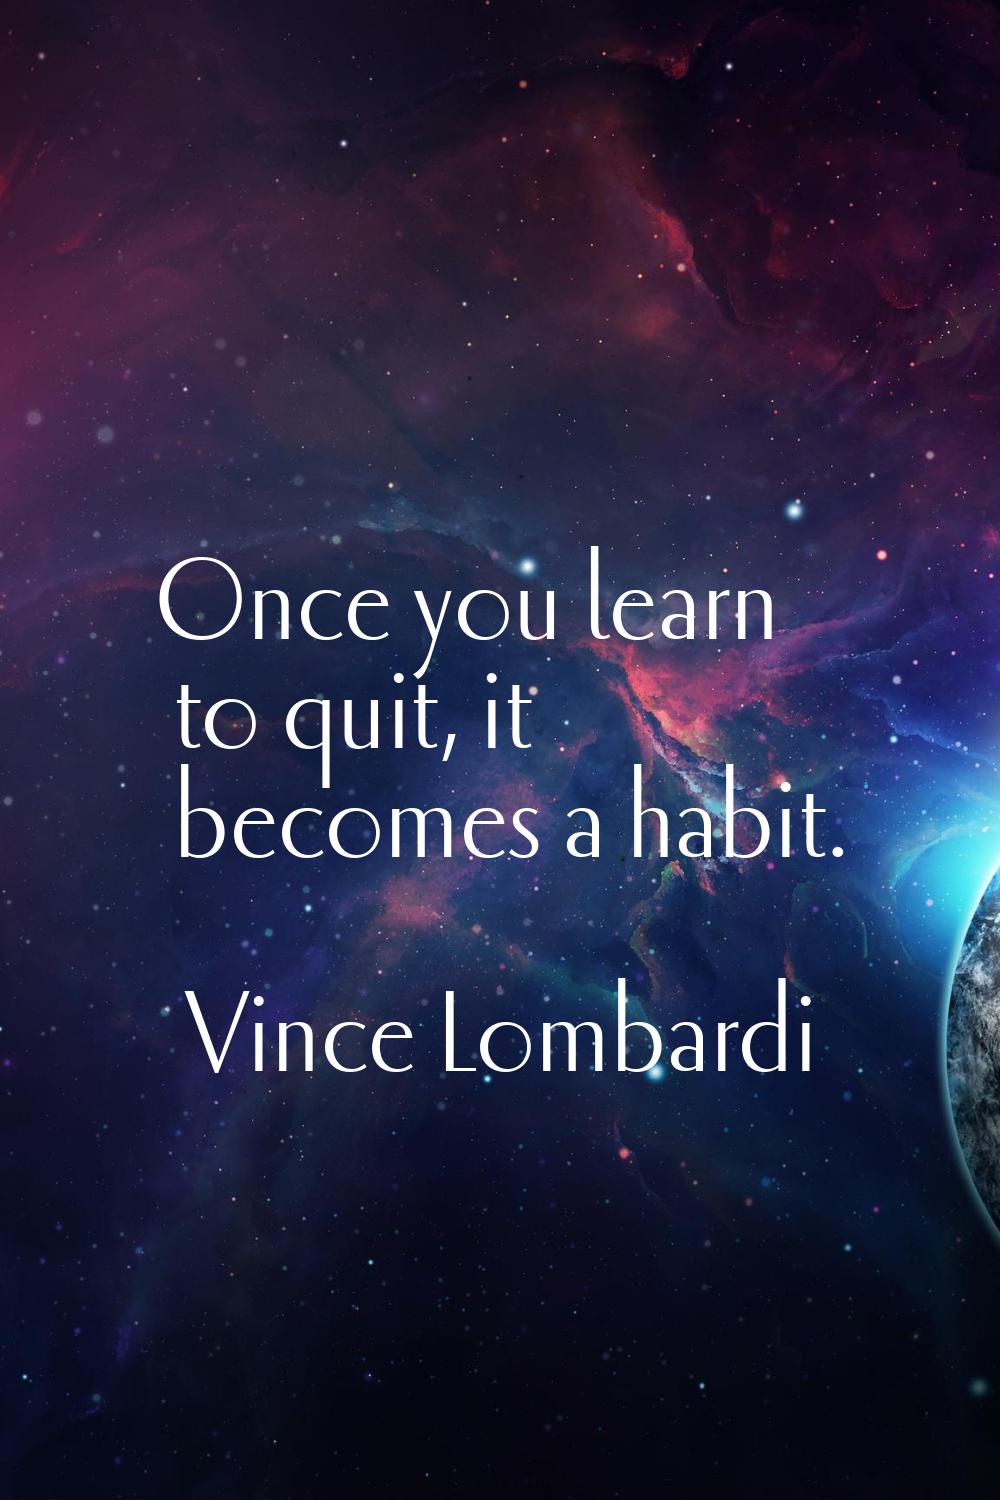 Once you learn to quit, it becomes a habit.